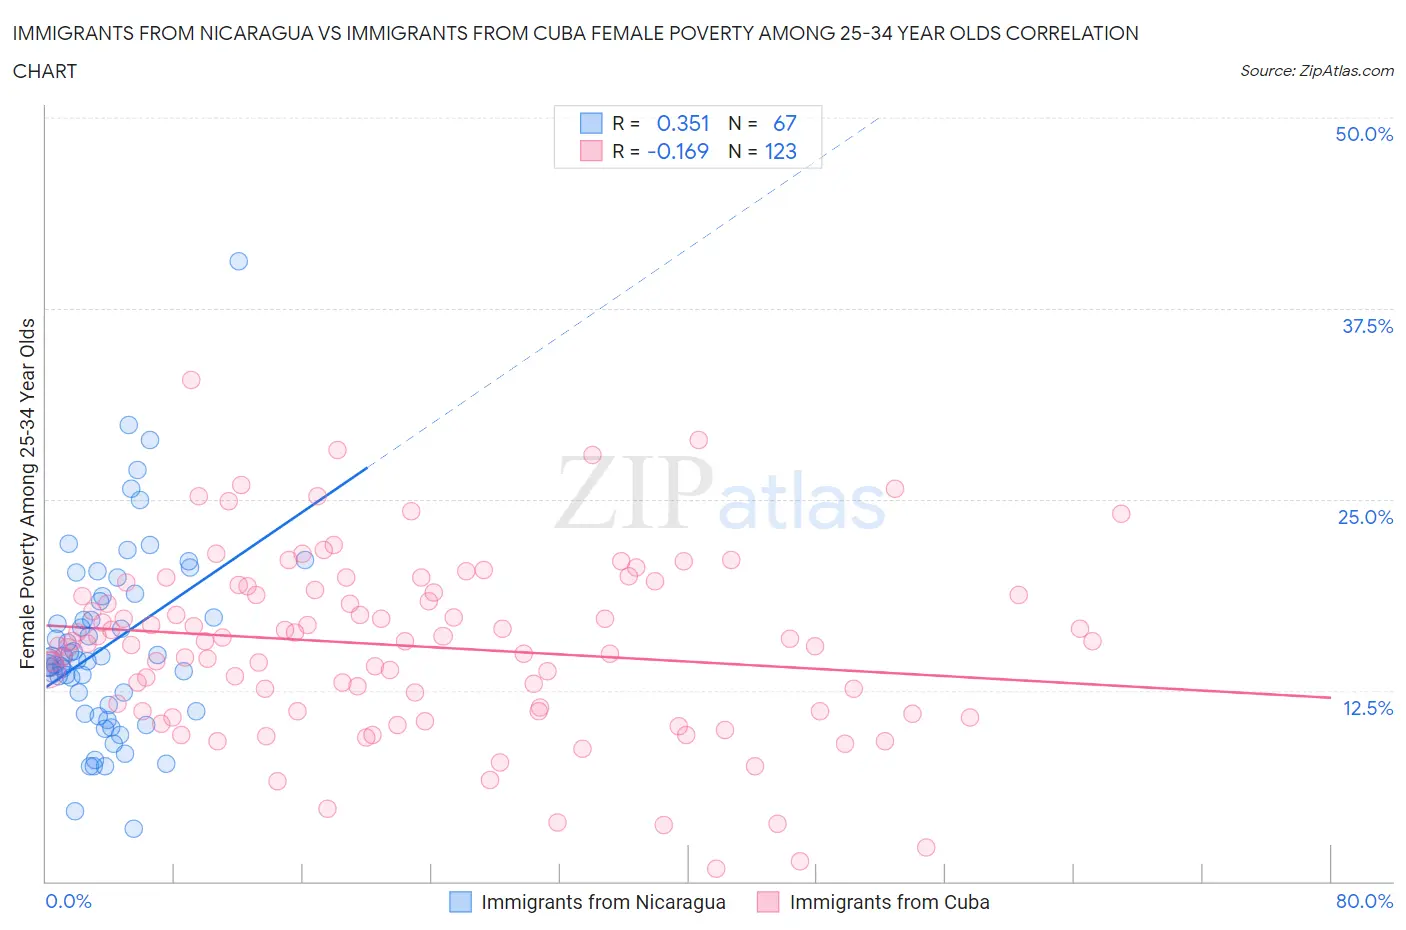 Immigrants from Nicaragua vs Immigrants from Cuba Female Poverty Among 25-34 Year Olds